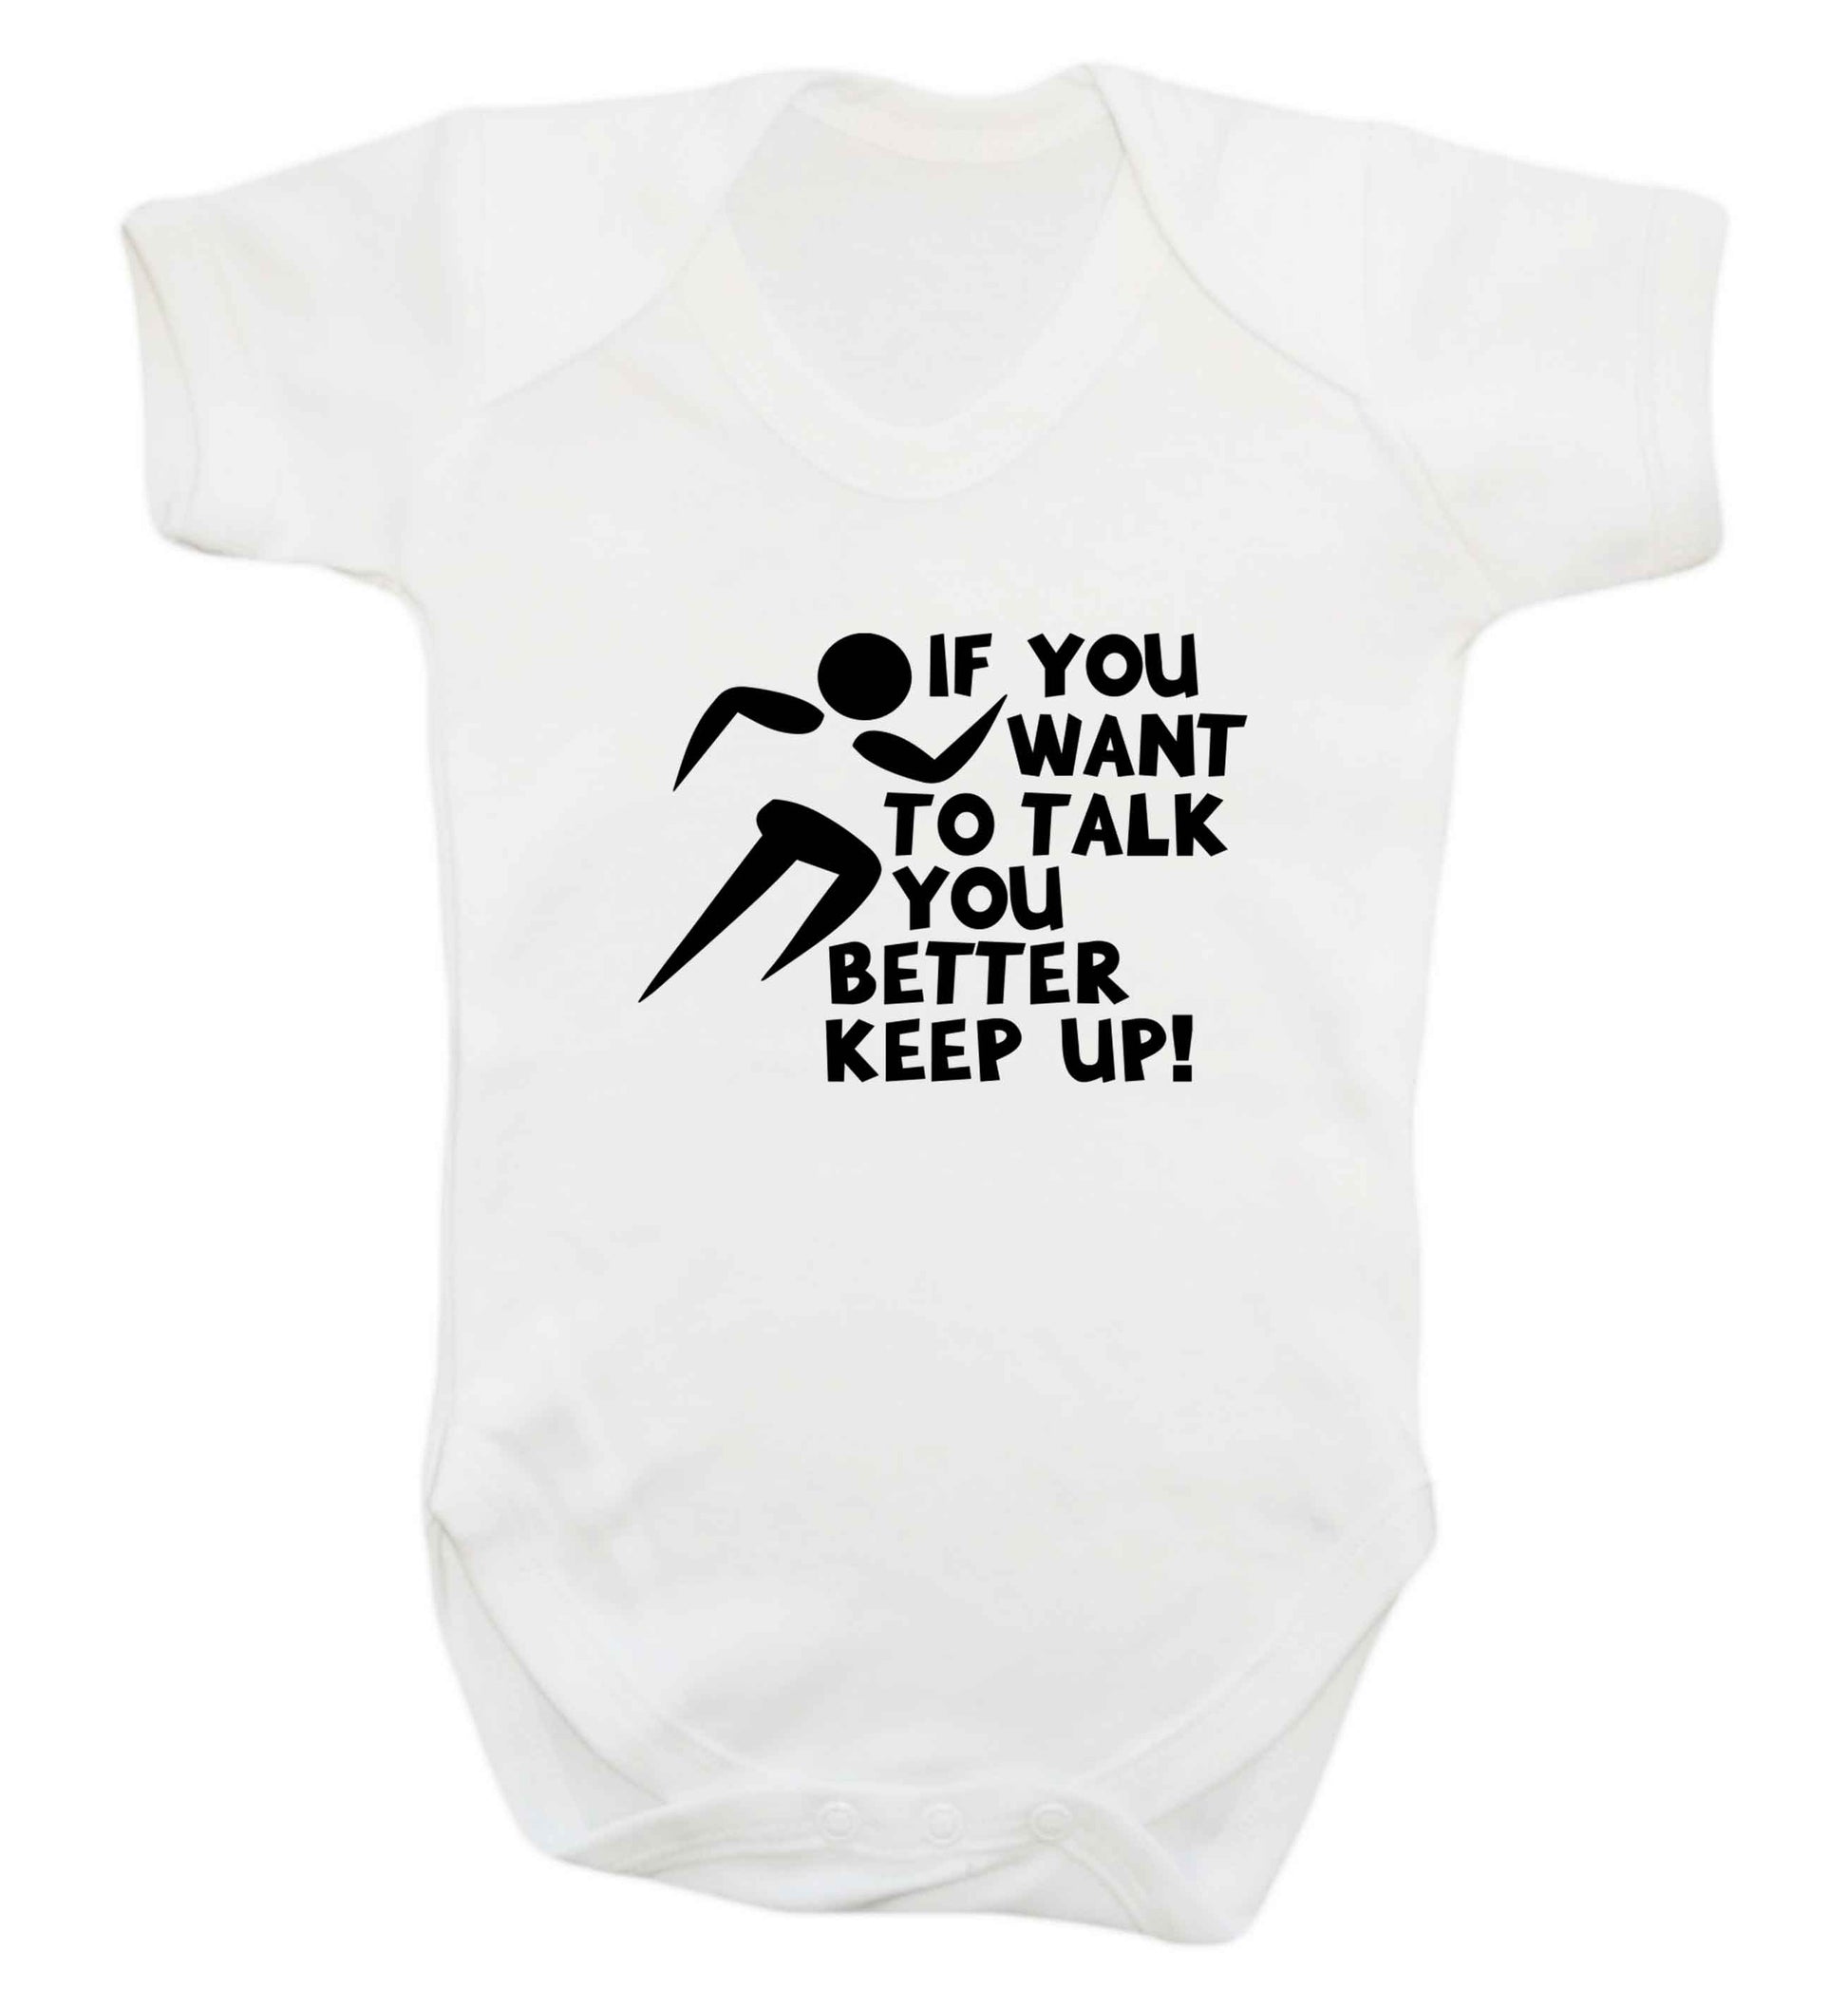 If you want to talk you better keep up! baby vest white 18-24 months